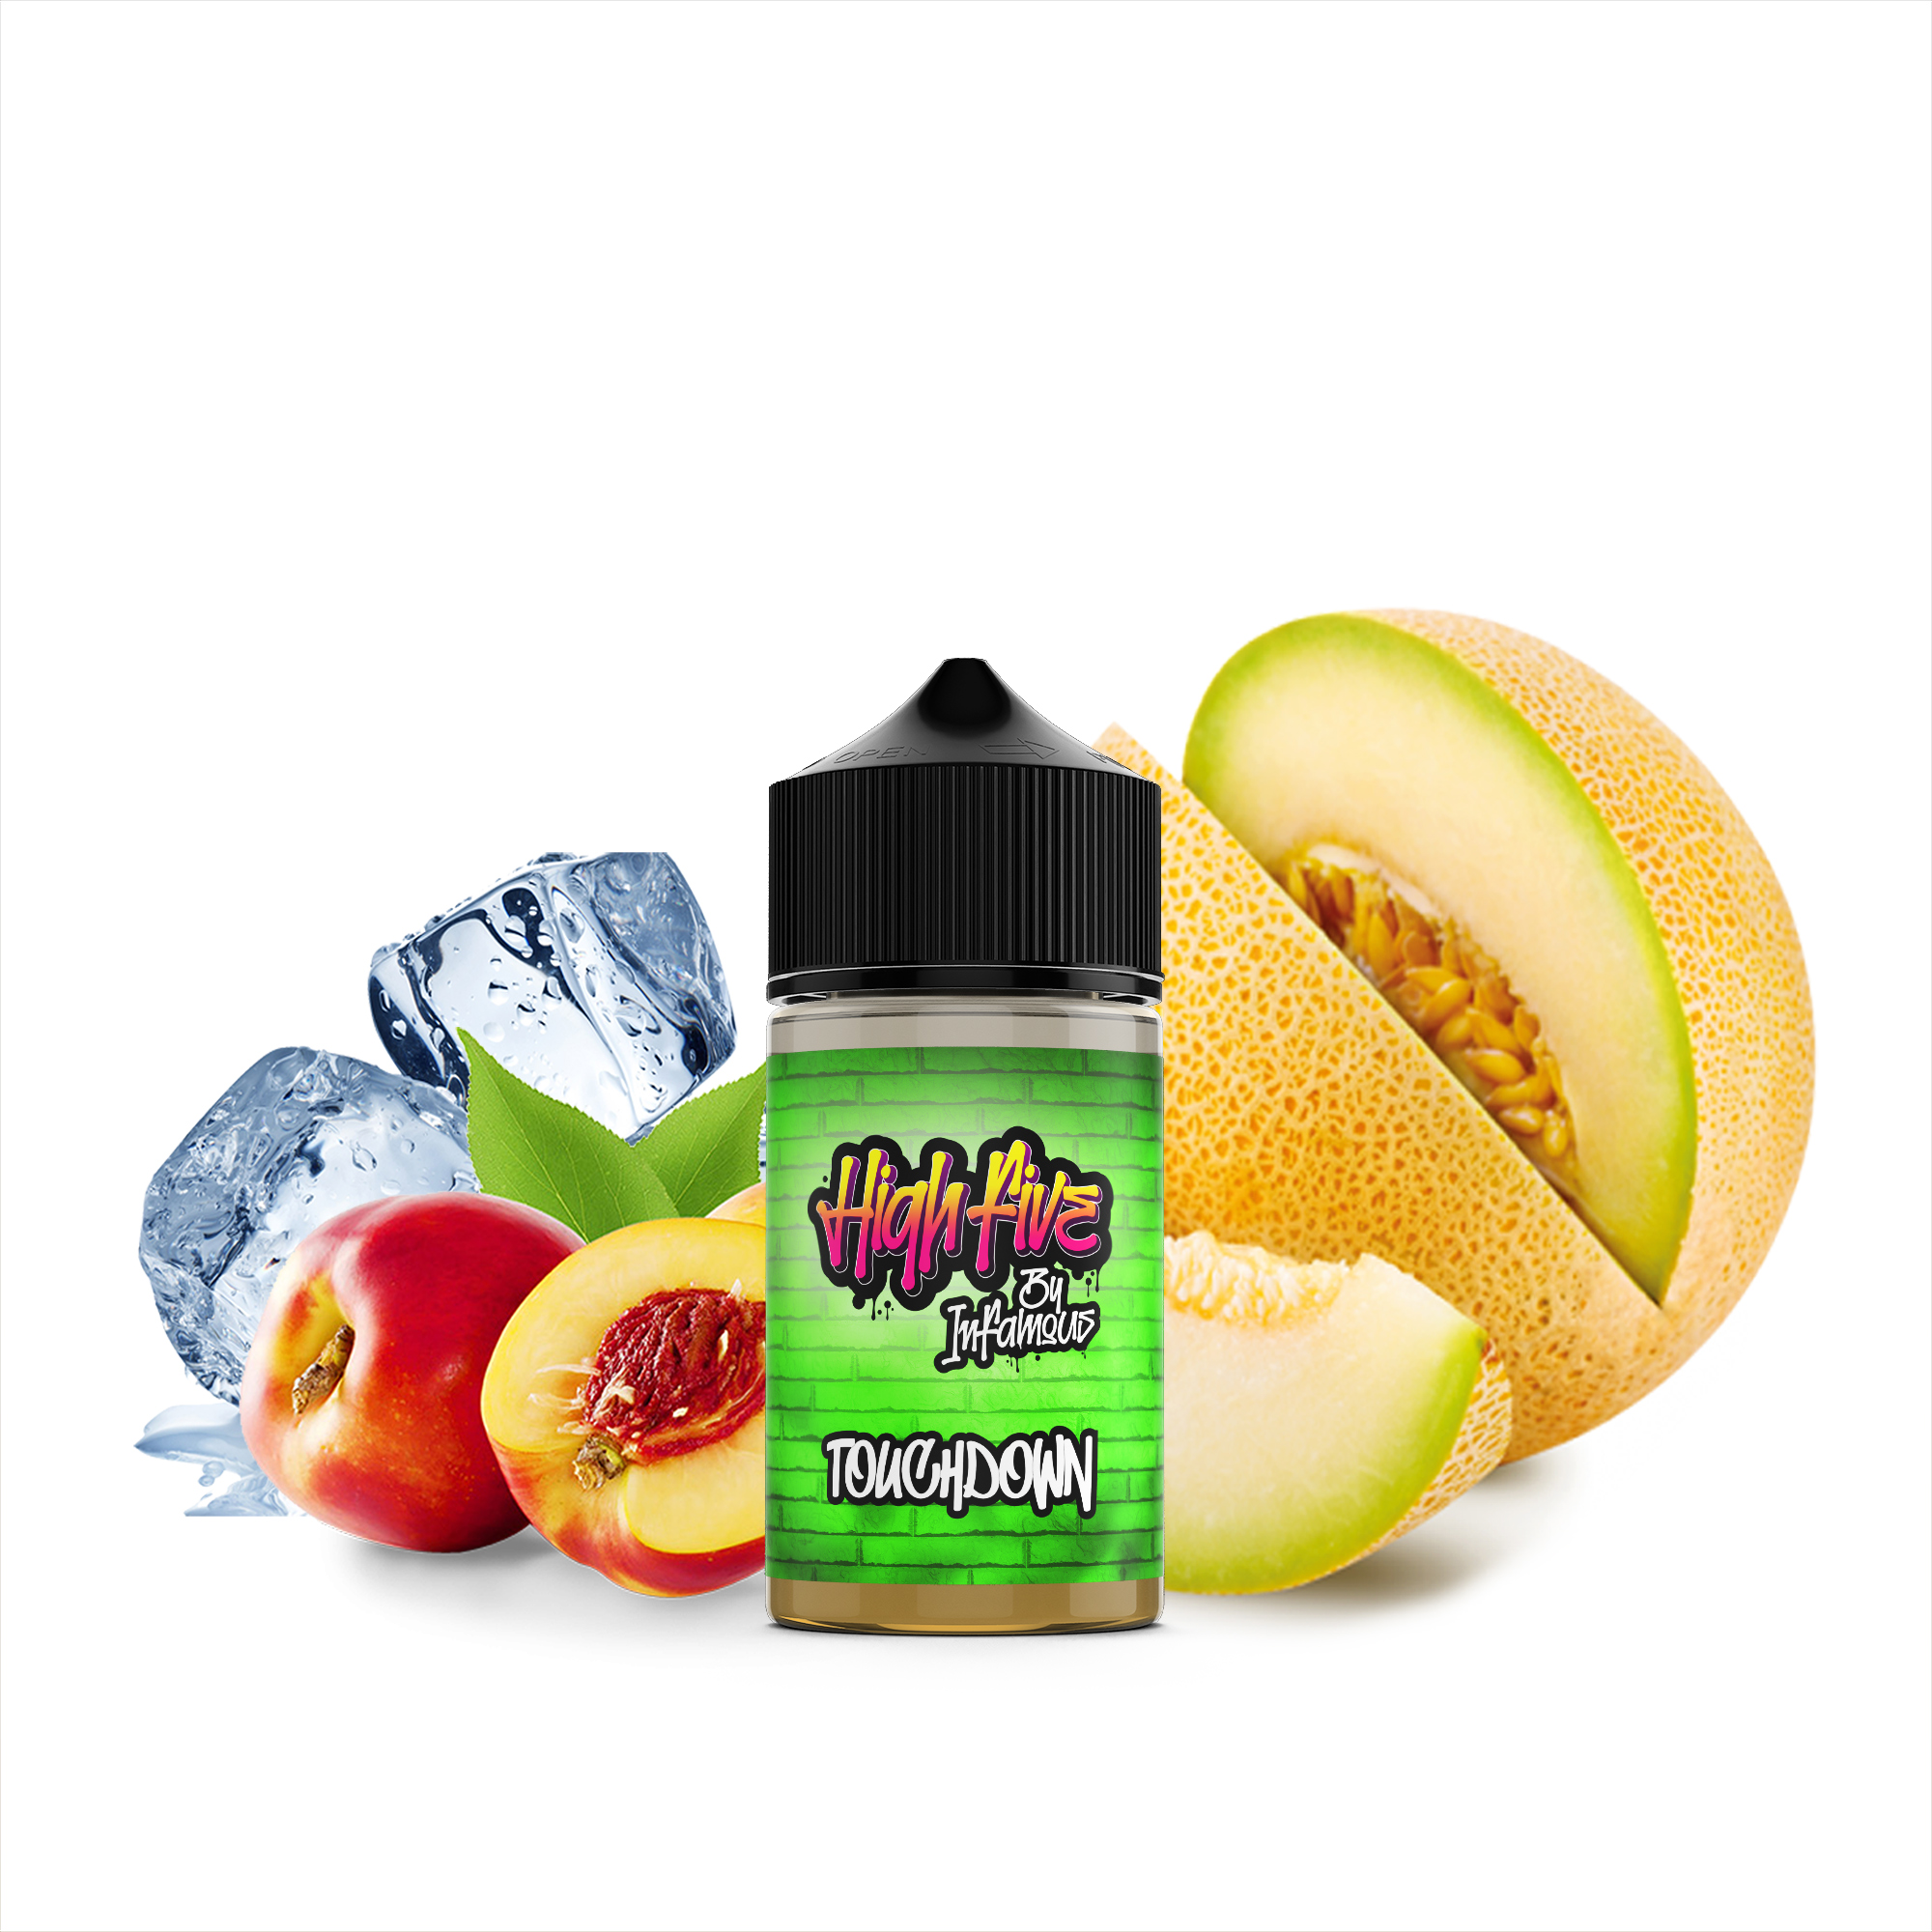 INFAMOUS HIGH FIVE AROMA TOUCHDOWN 10 ml